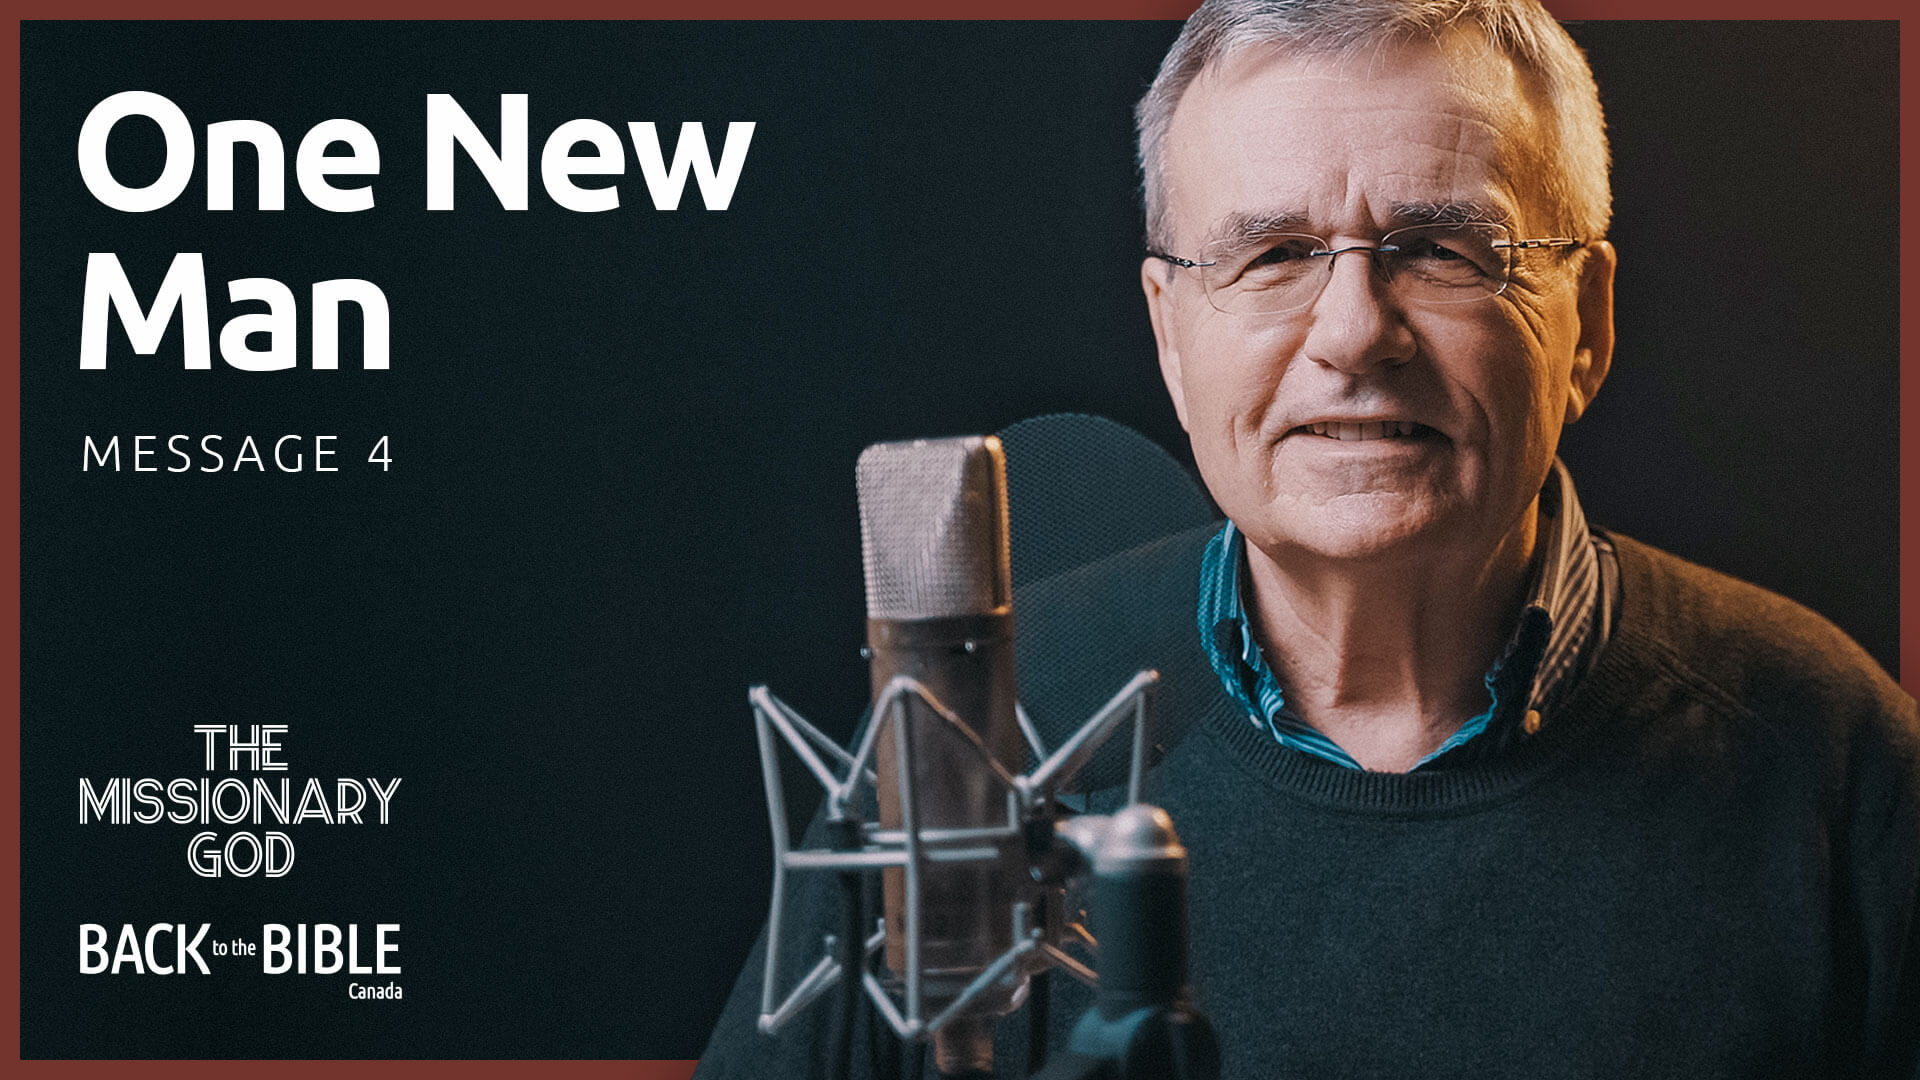 One New Man | Back to the Bible Canada with Dr. John Neufeld